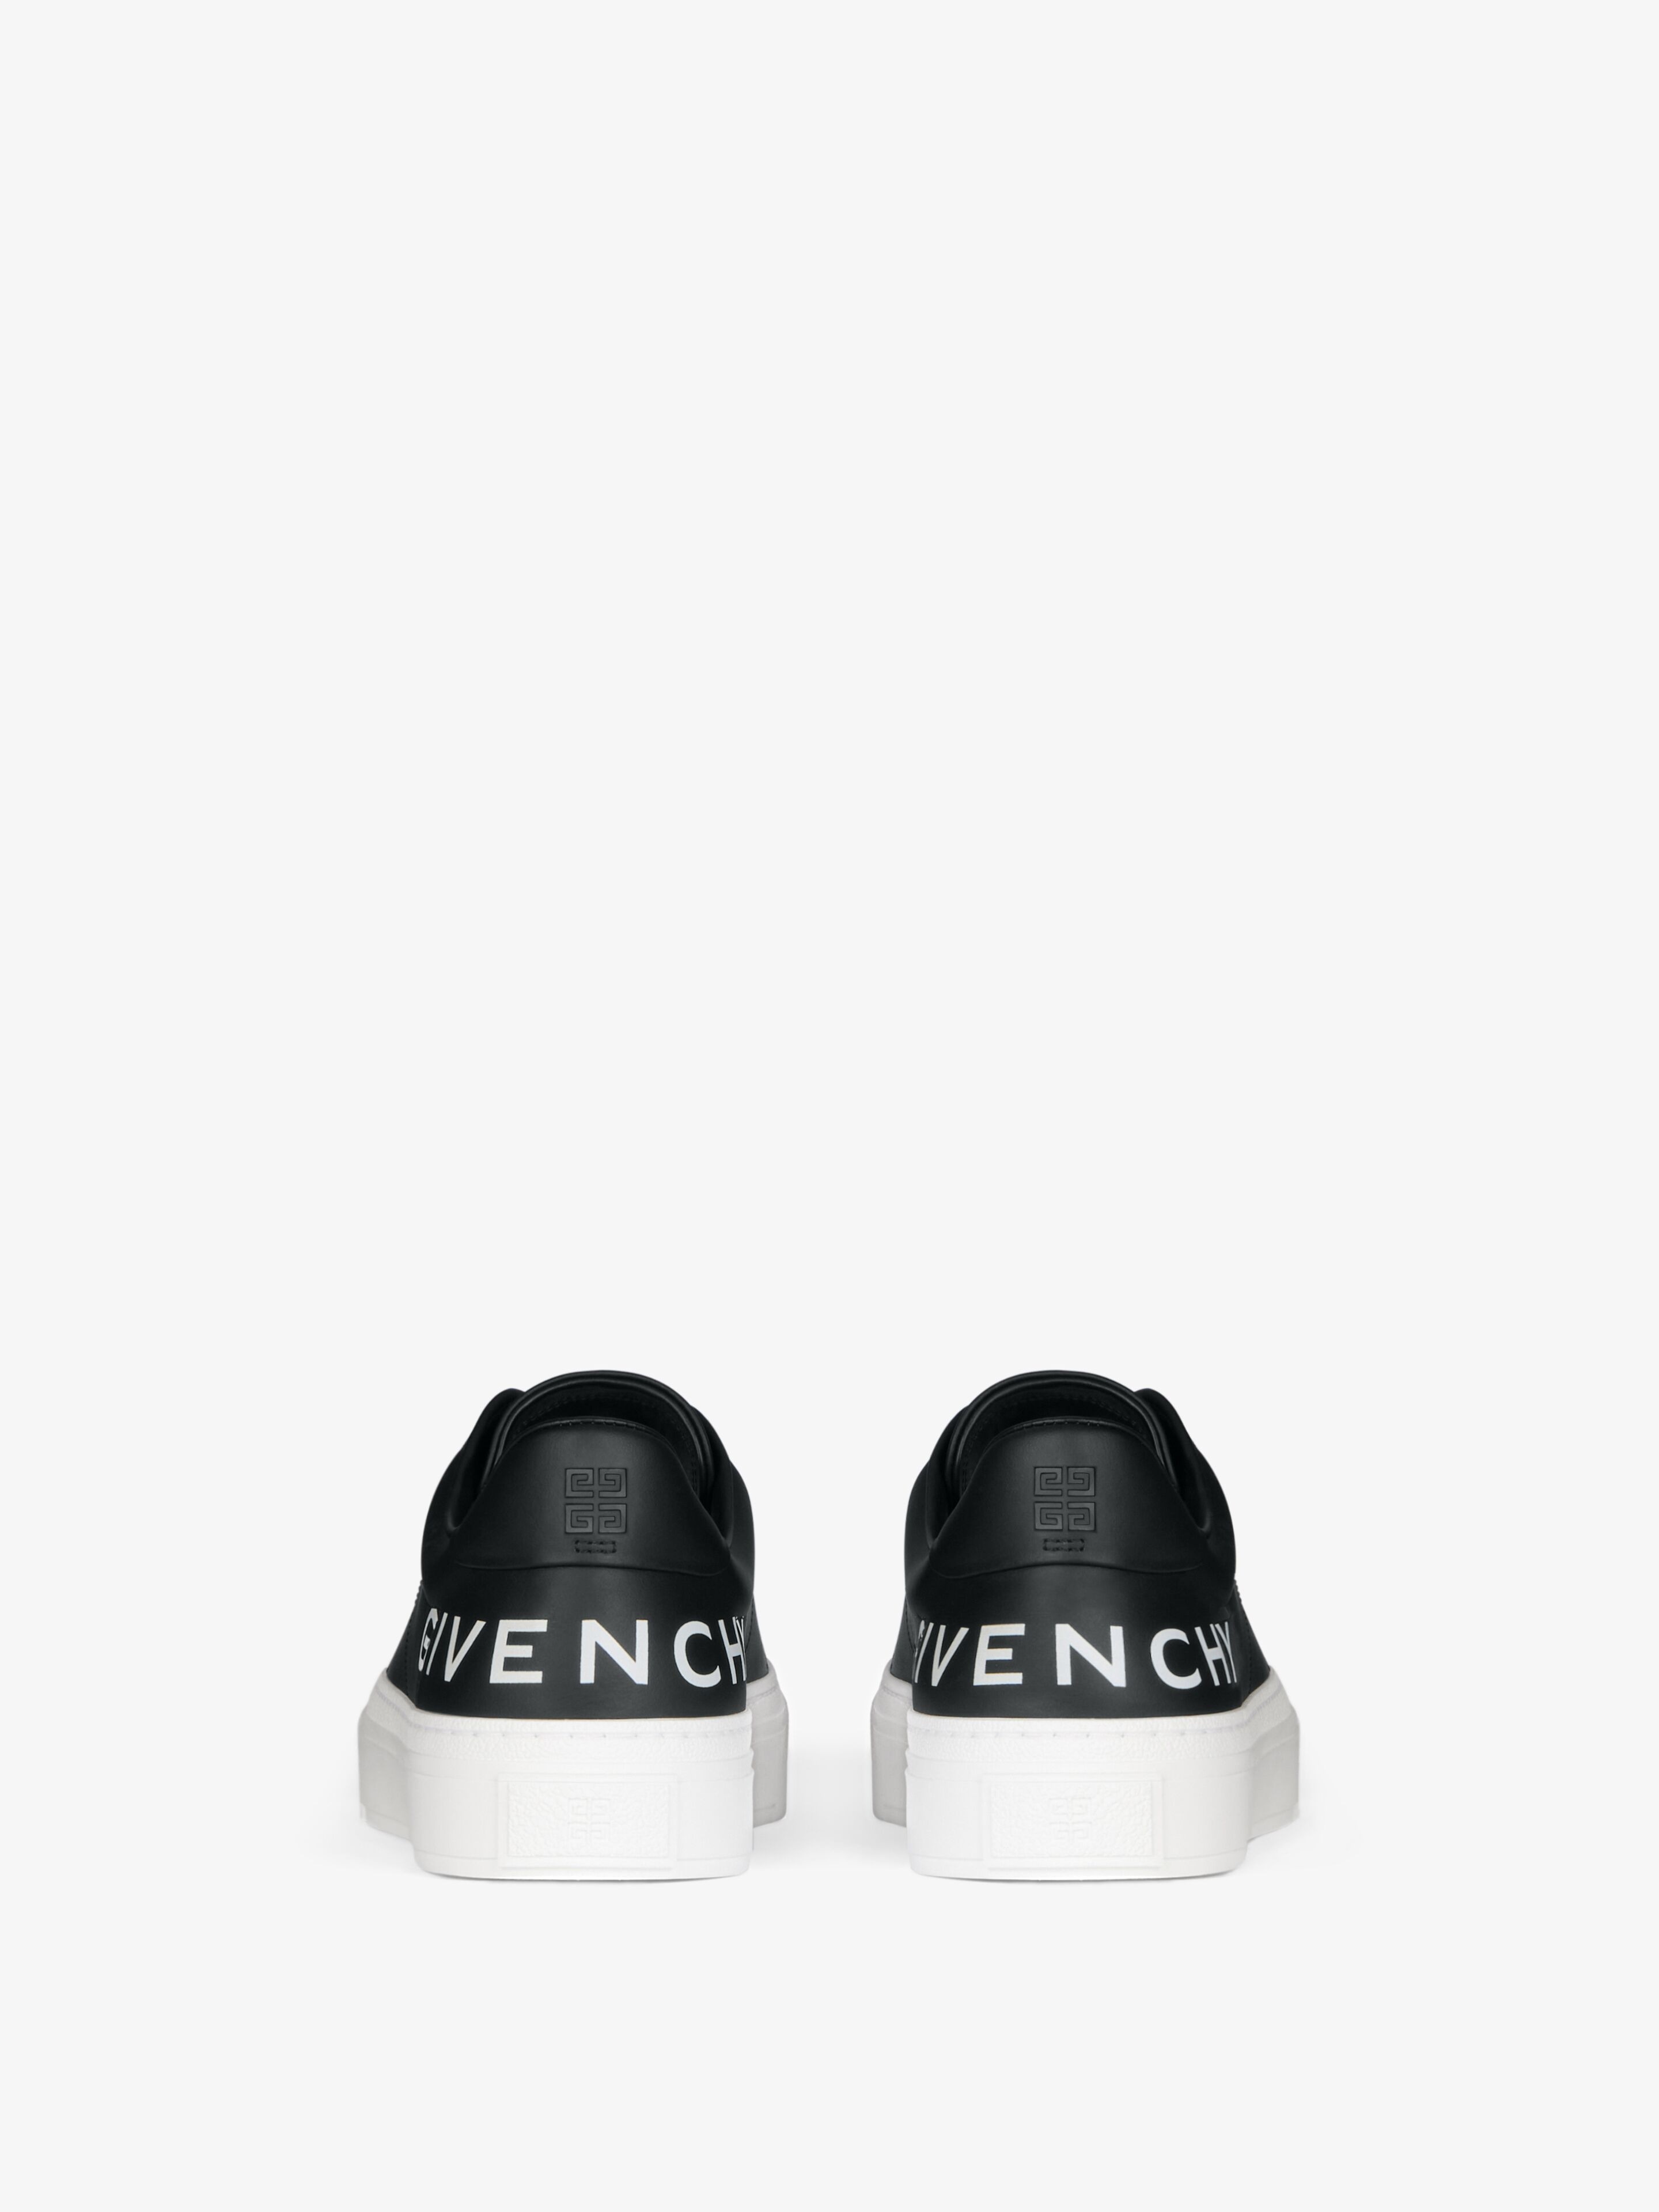 CITY SPORT SNEAKERS IN LEATHER WITH PRINTED GIVENCHY LOGO - 7